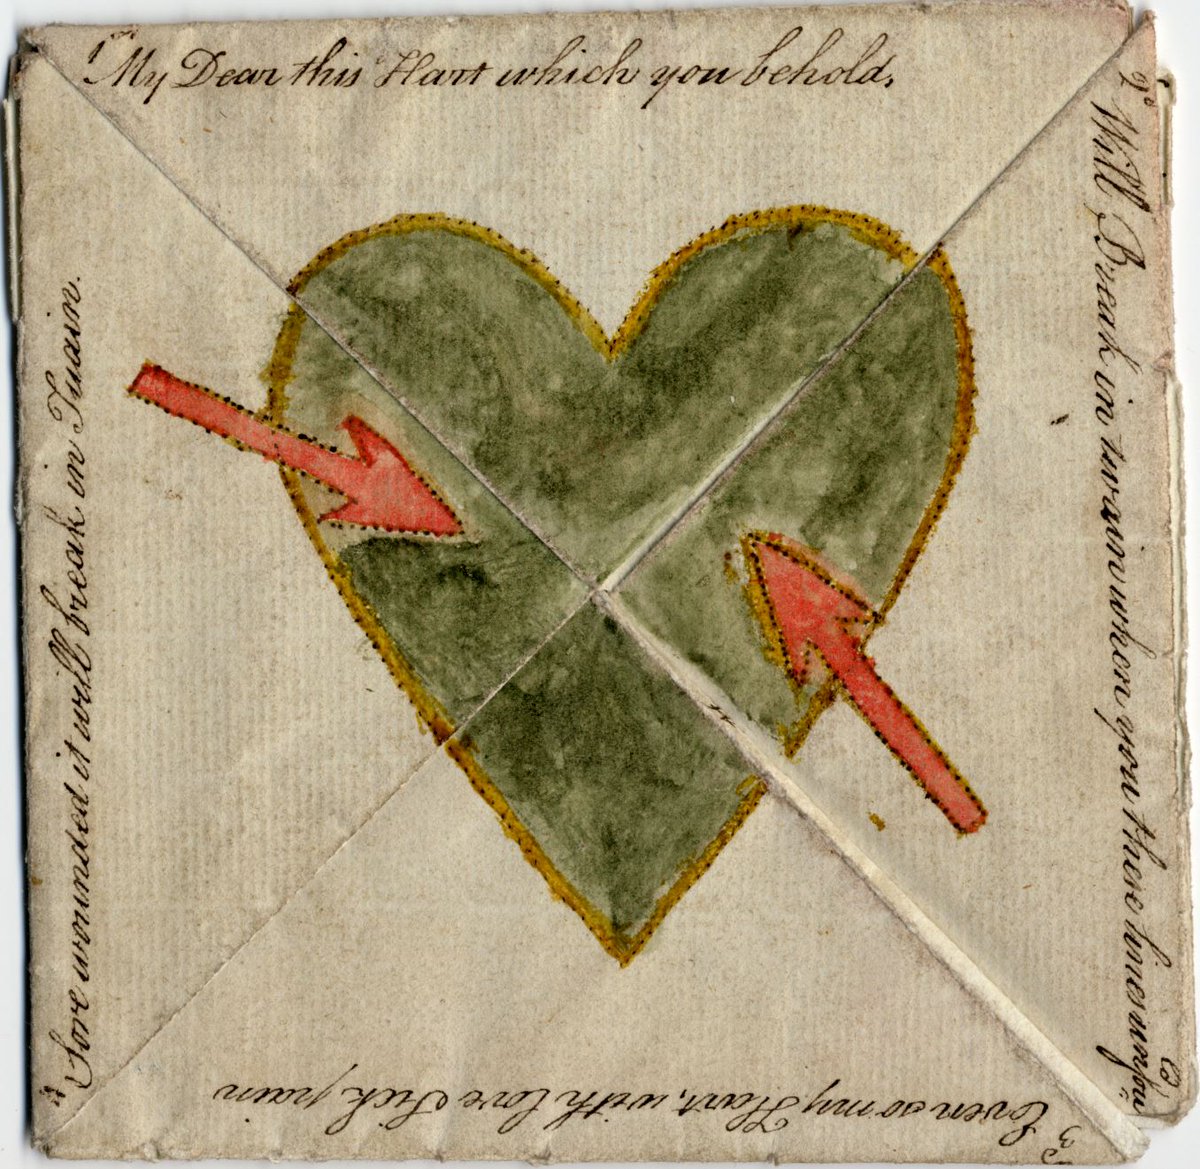 For #ValentinesDay we have a beautiful folded Valentine card, which is perfect for #EYASecrets because we don't know who made or received it. Reference DDSP/60/1/10

#ExploreYourArchive #EYA